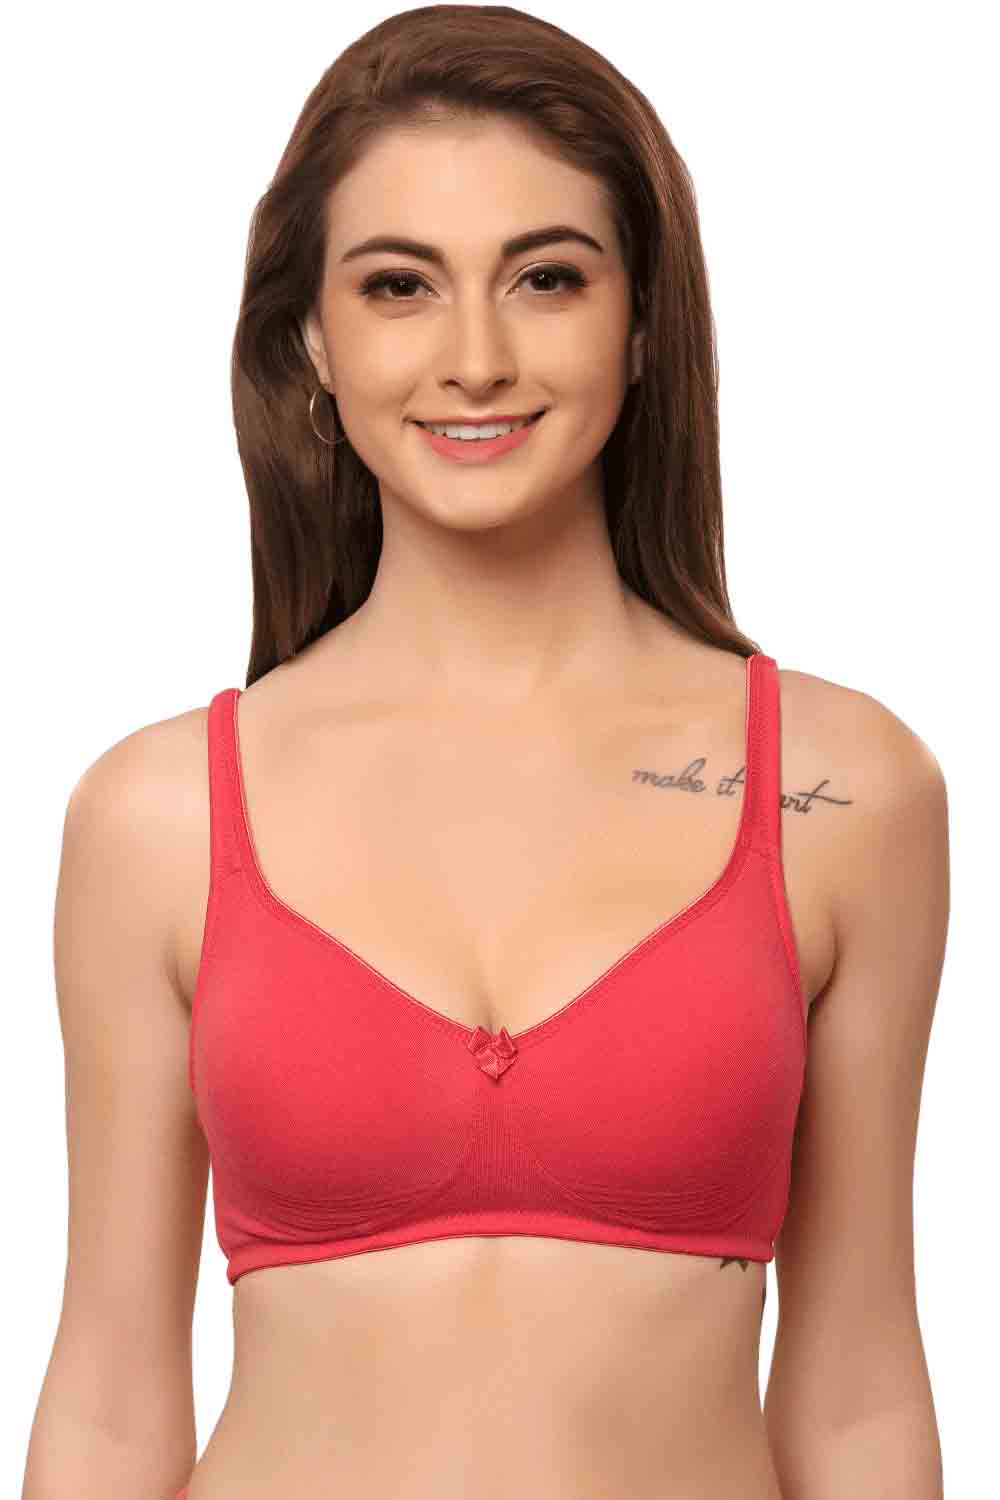 Organic Cotton  Antimicrobial  Seamless Side Support Bra (Pack of 3)-ISB057-B.Pink_B.Pink_Pink Lace Print-